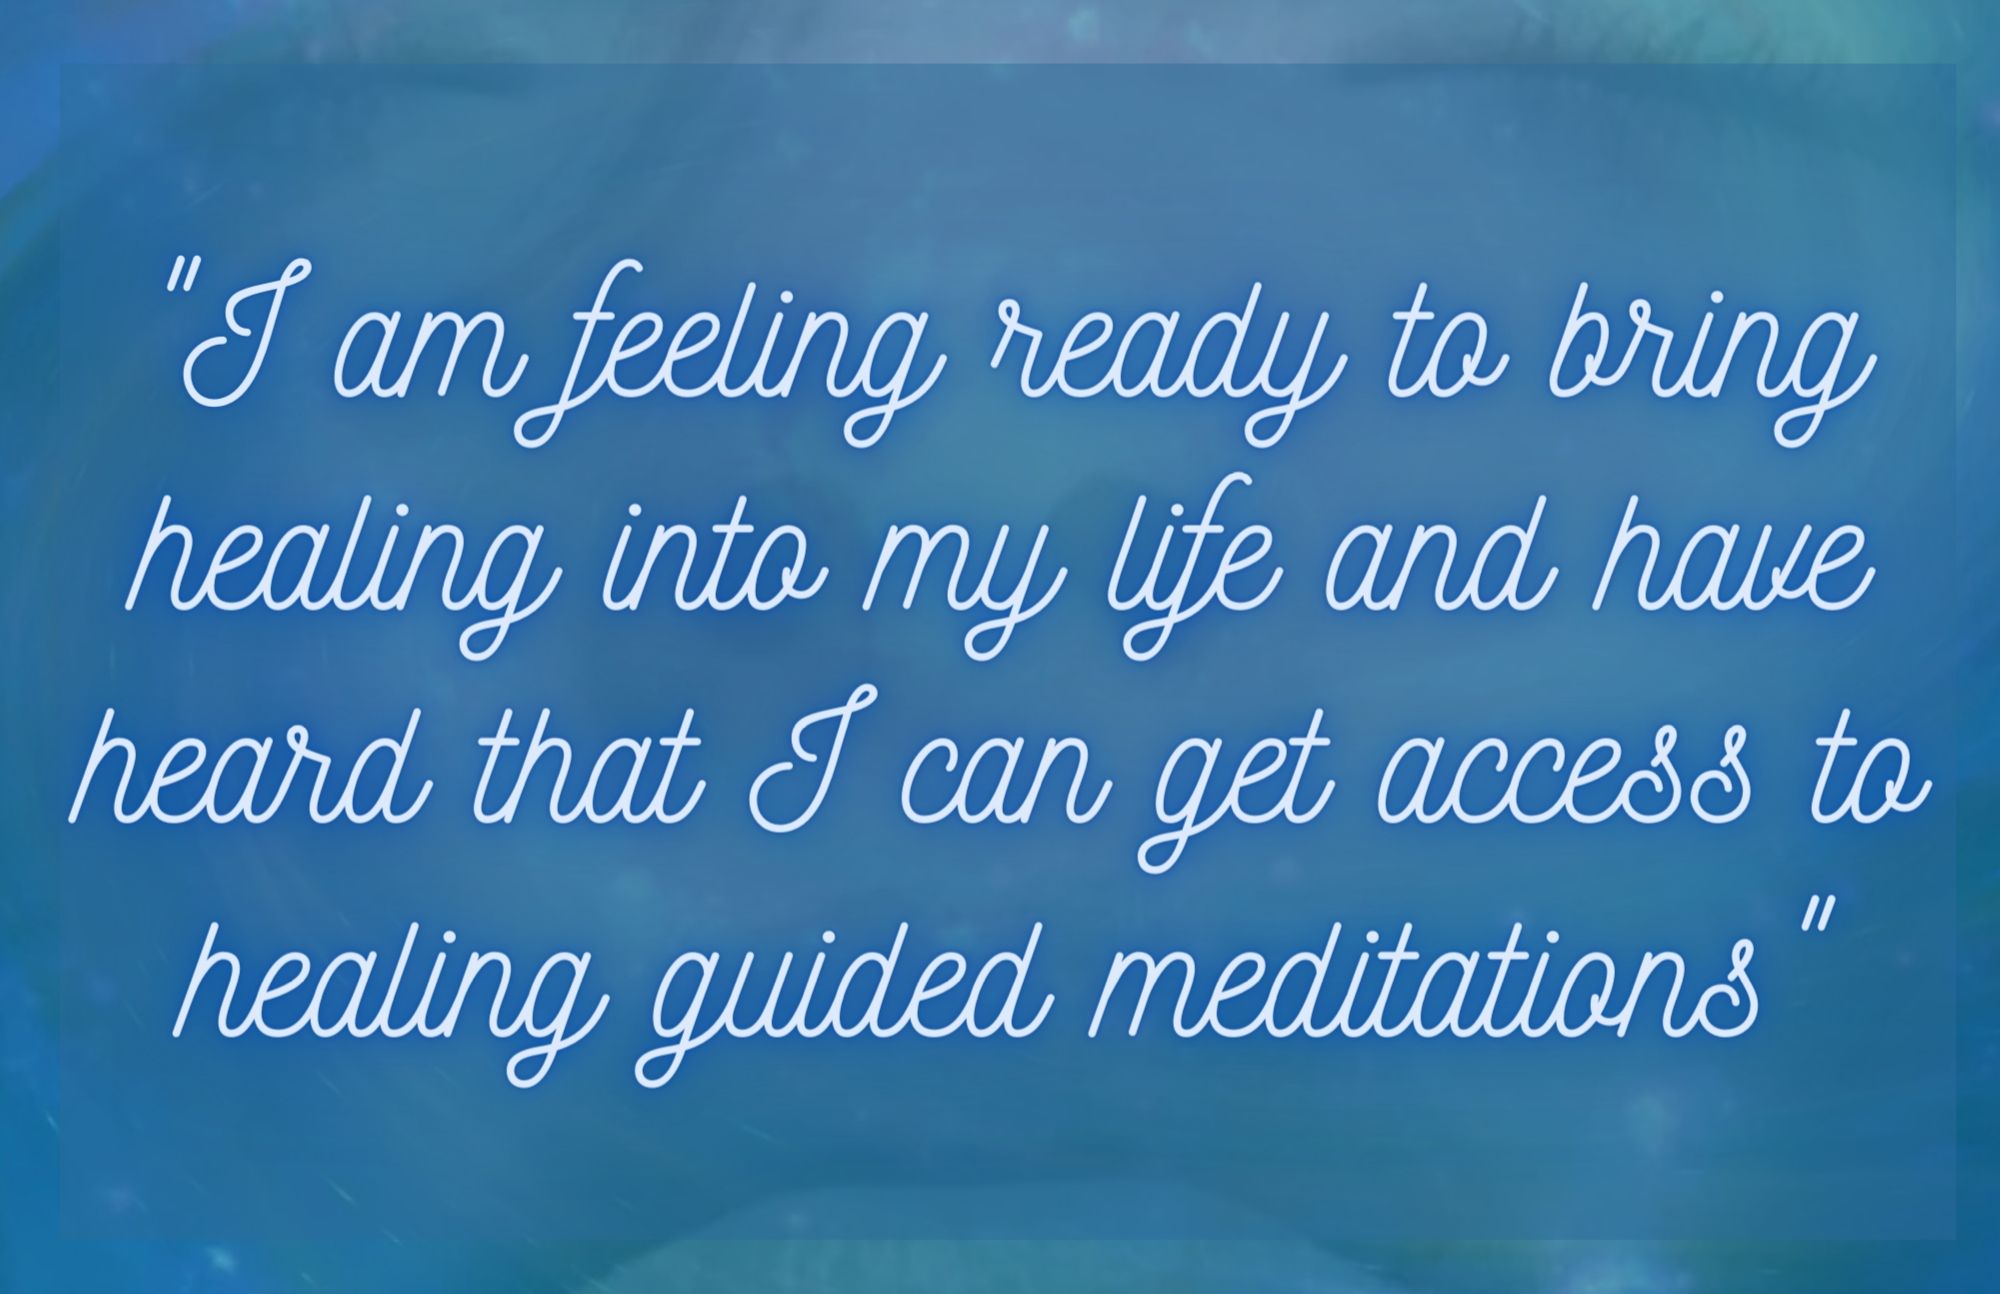 I am feeling ready to bring healing into my life and have heard, I can access healing guided meditations click here.